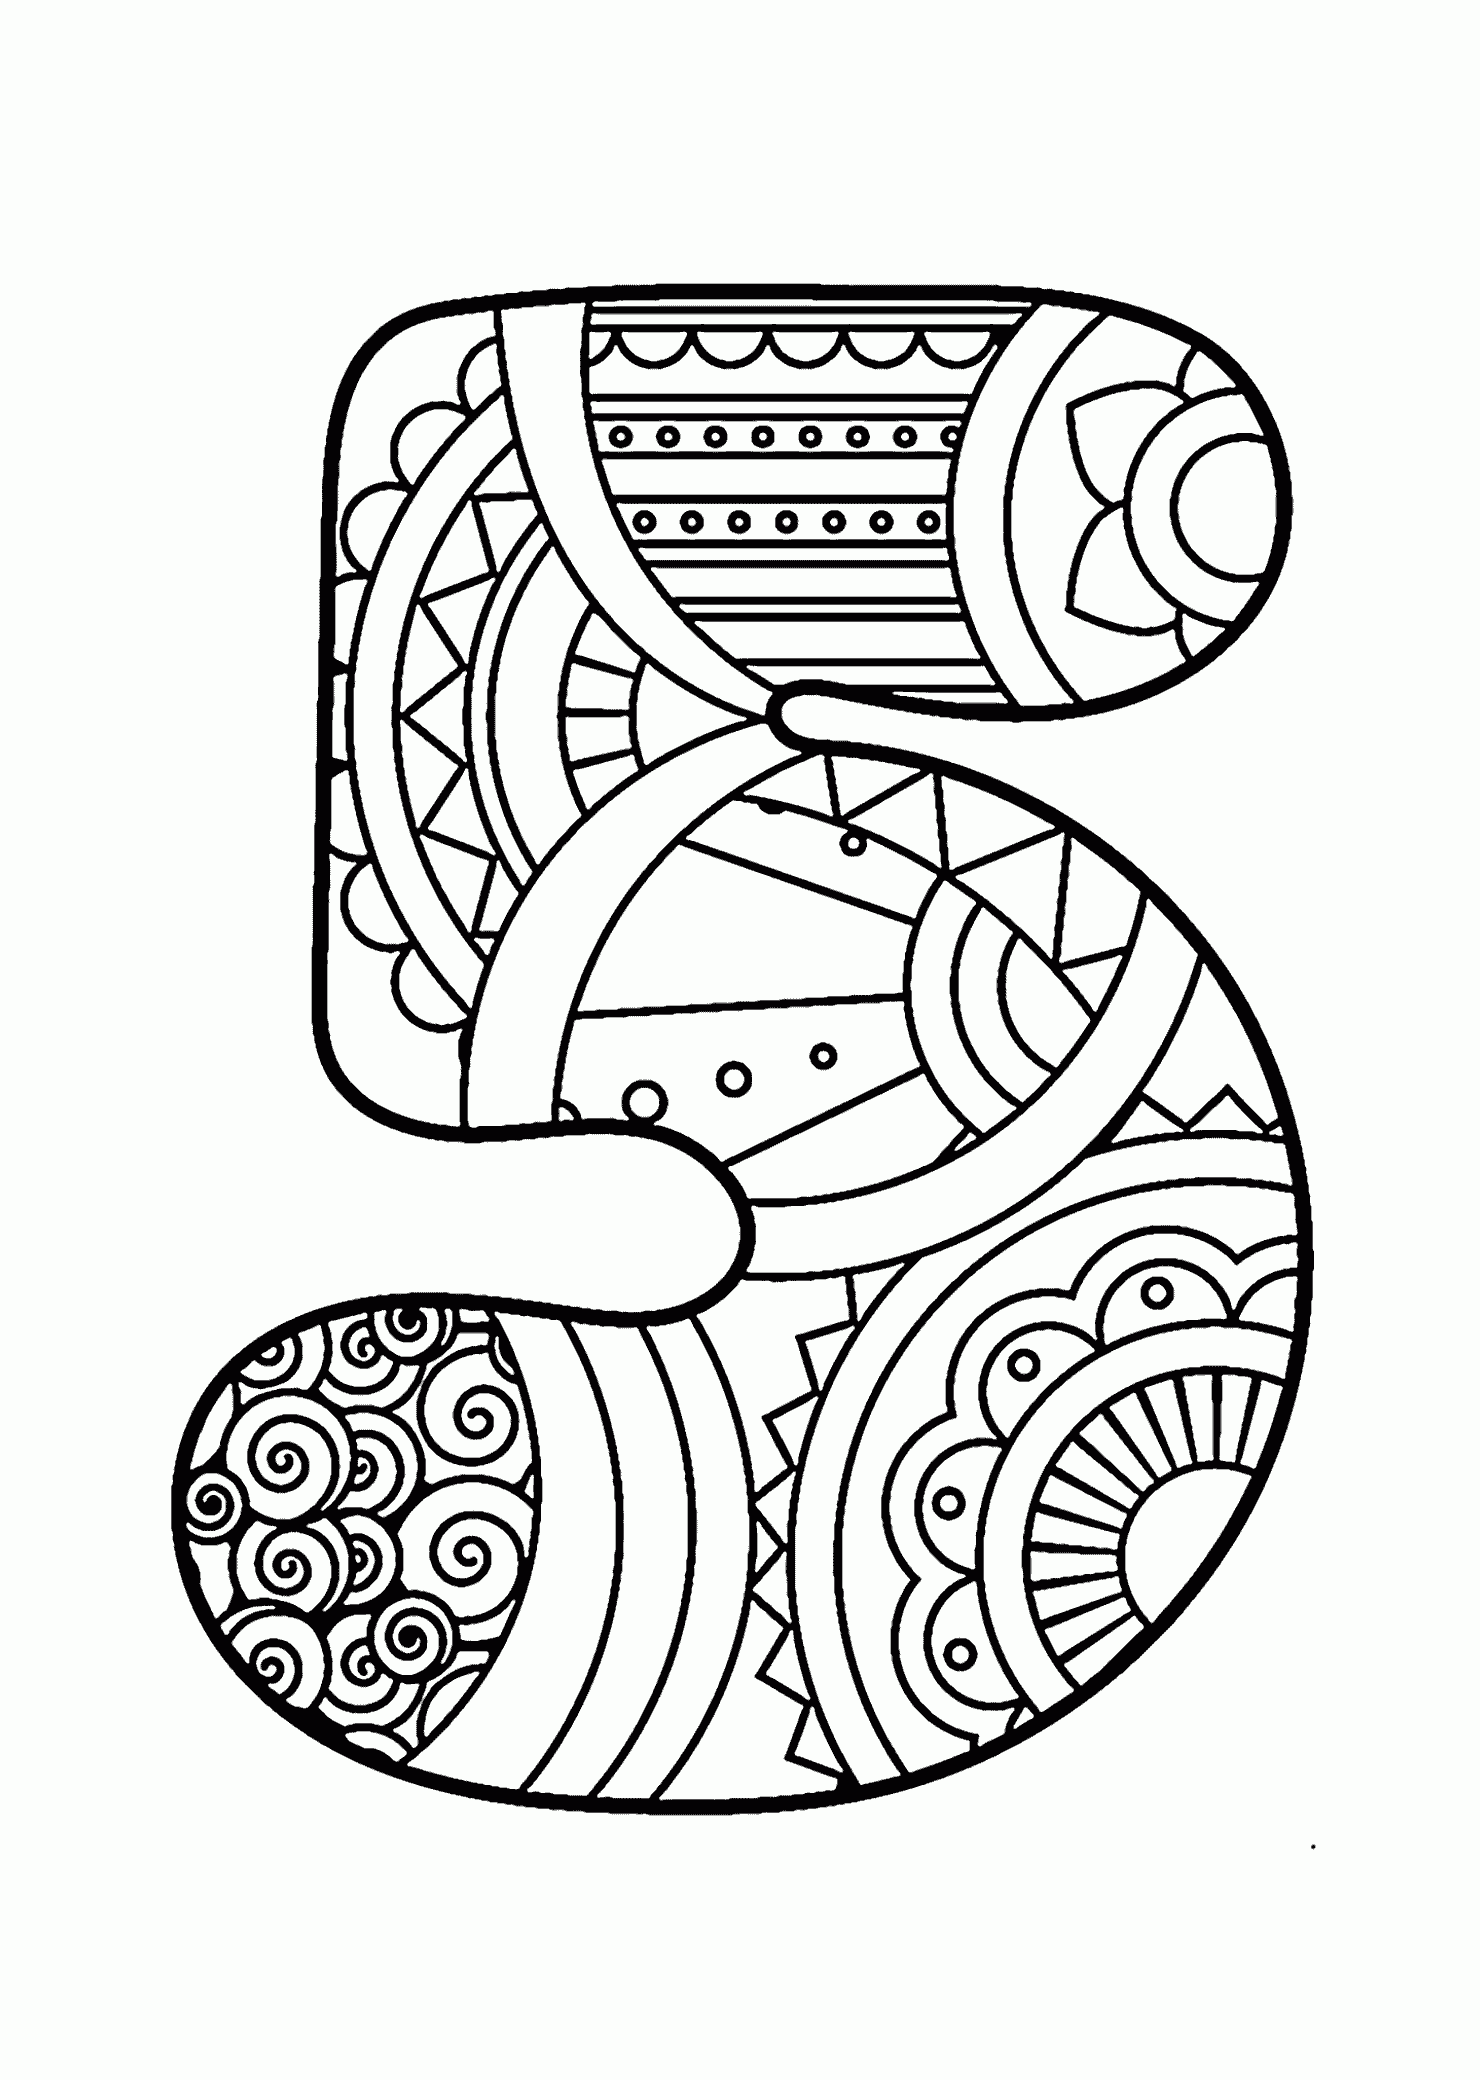 Pattern number coloring pages for kids counting numbers printables free